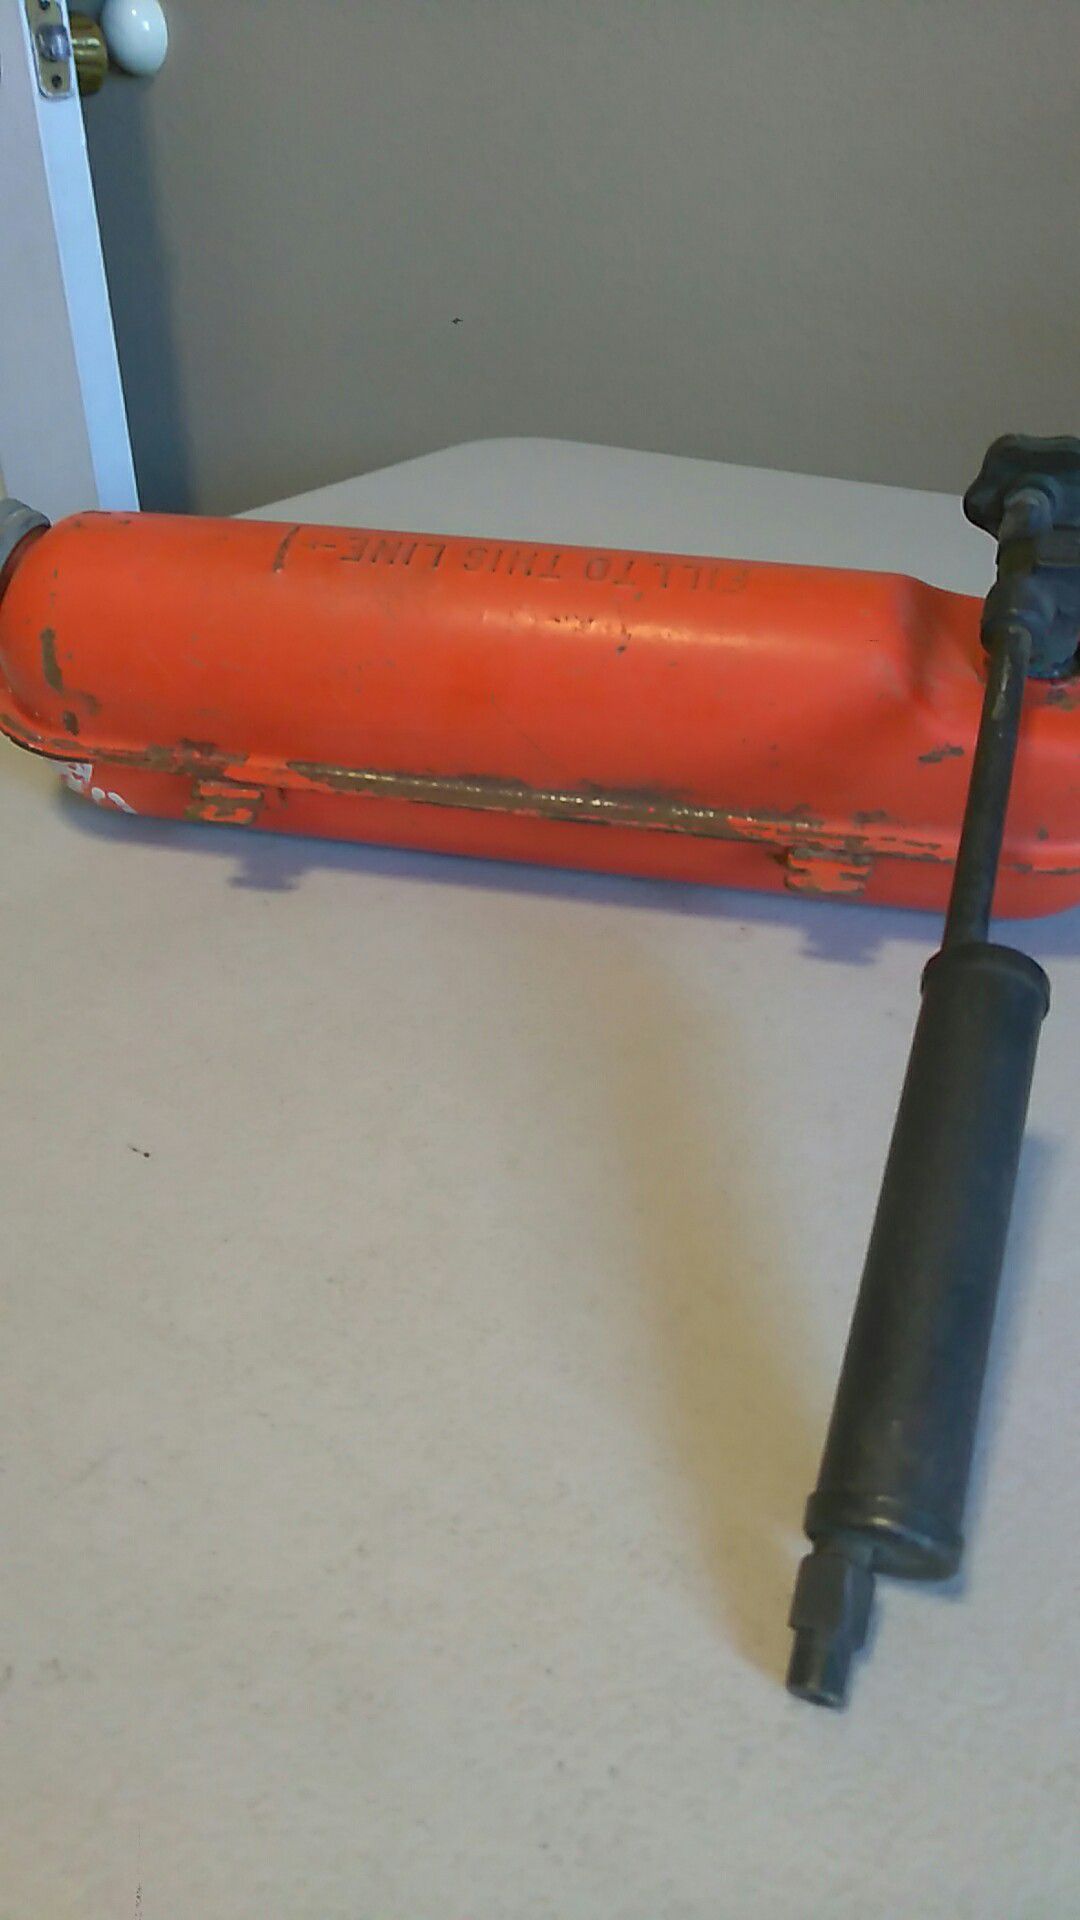 FUEL TANK FOR A COLEMAN CAMPING STOVE